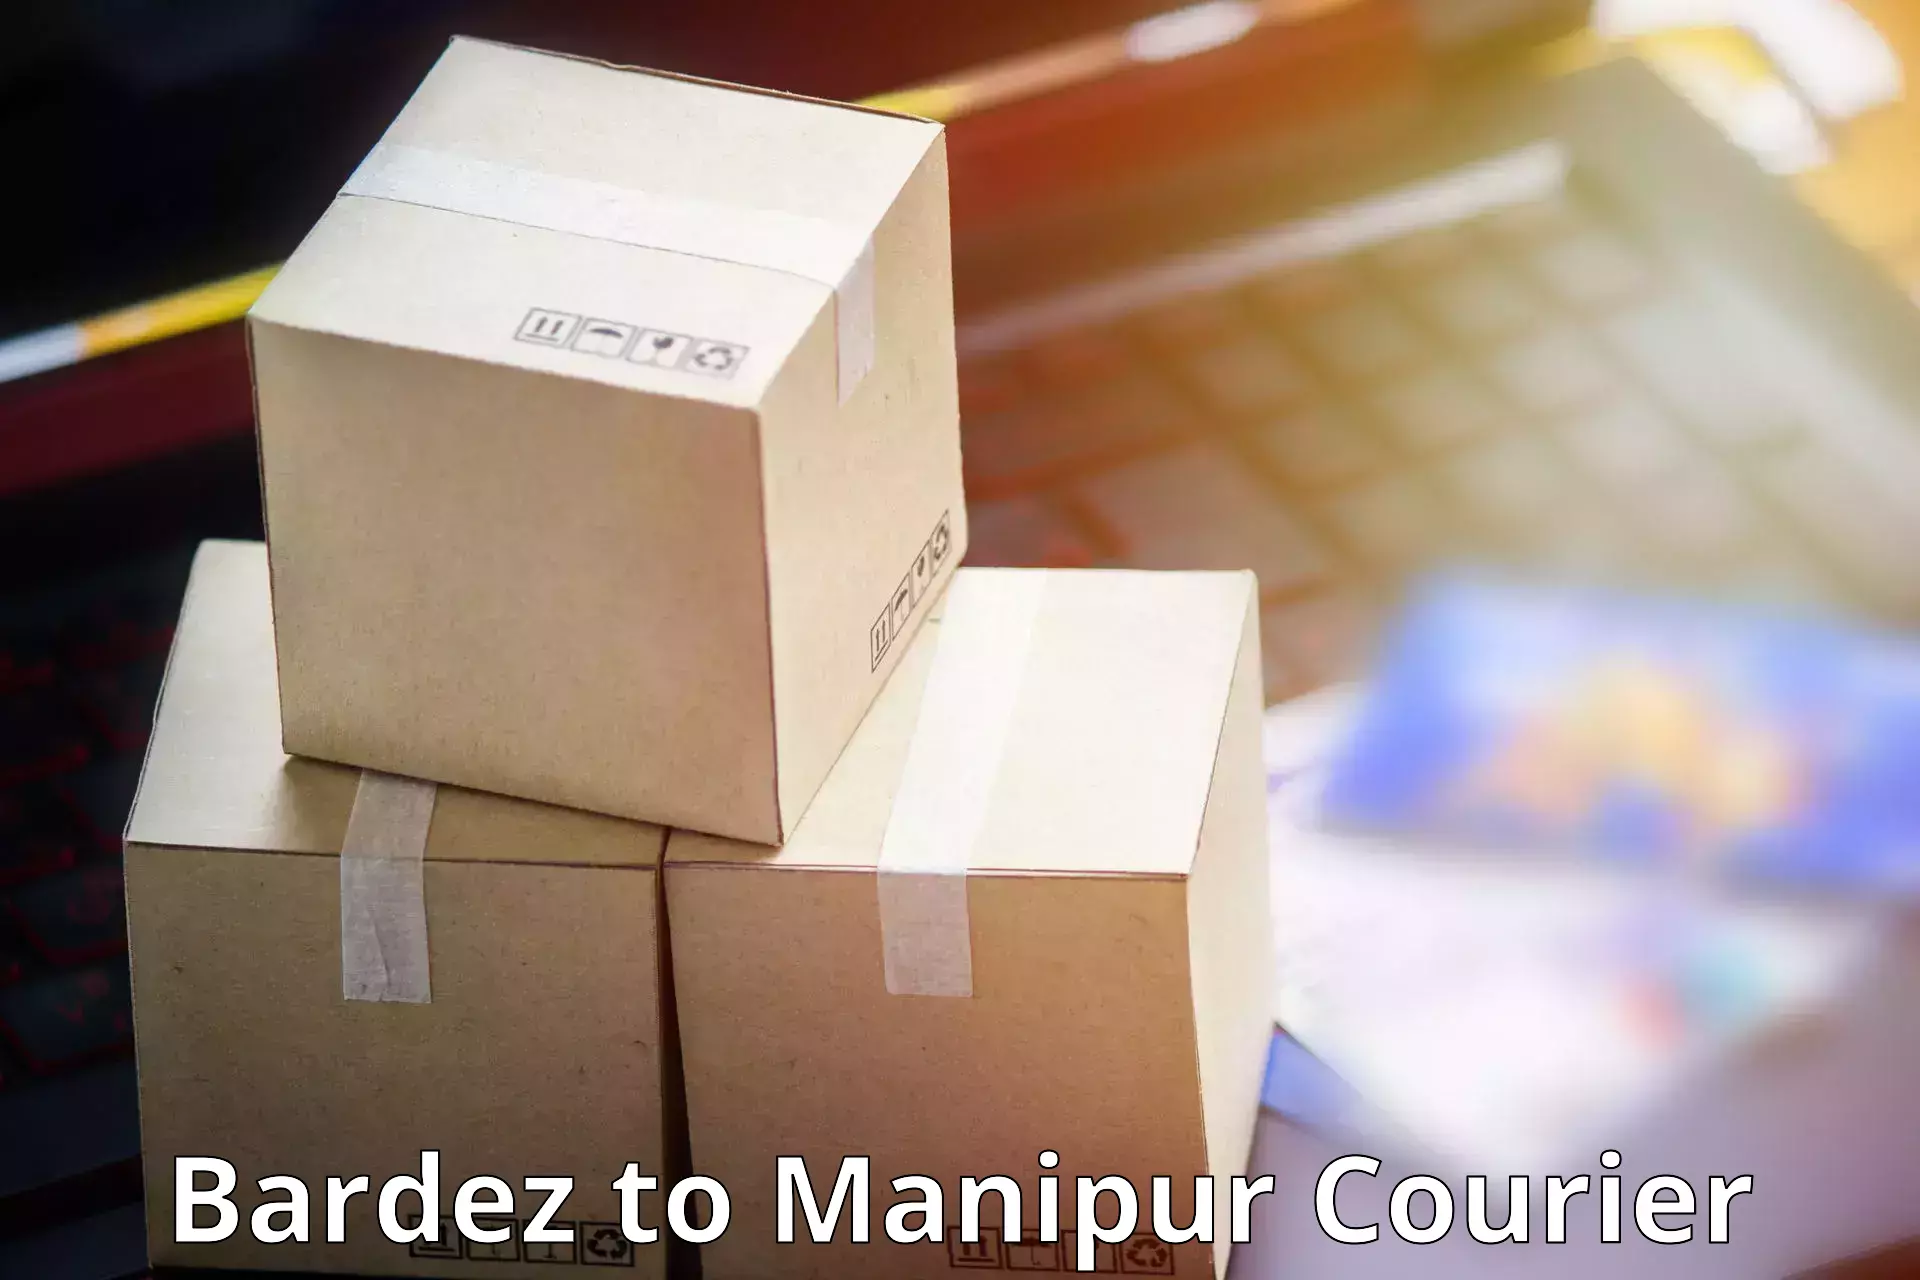 Premium courier solutions Bardez to Manipur